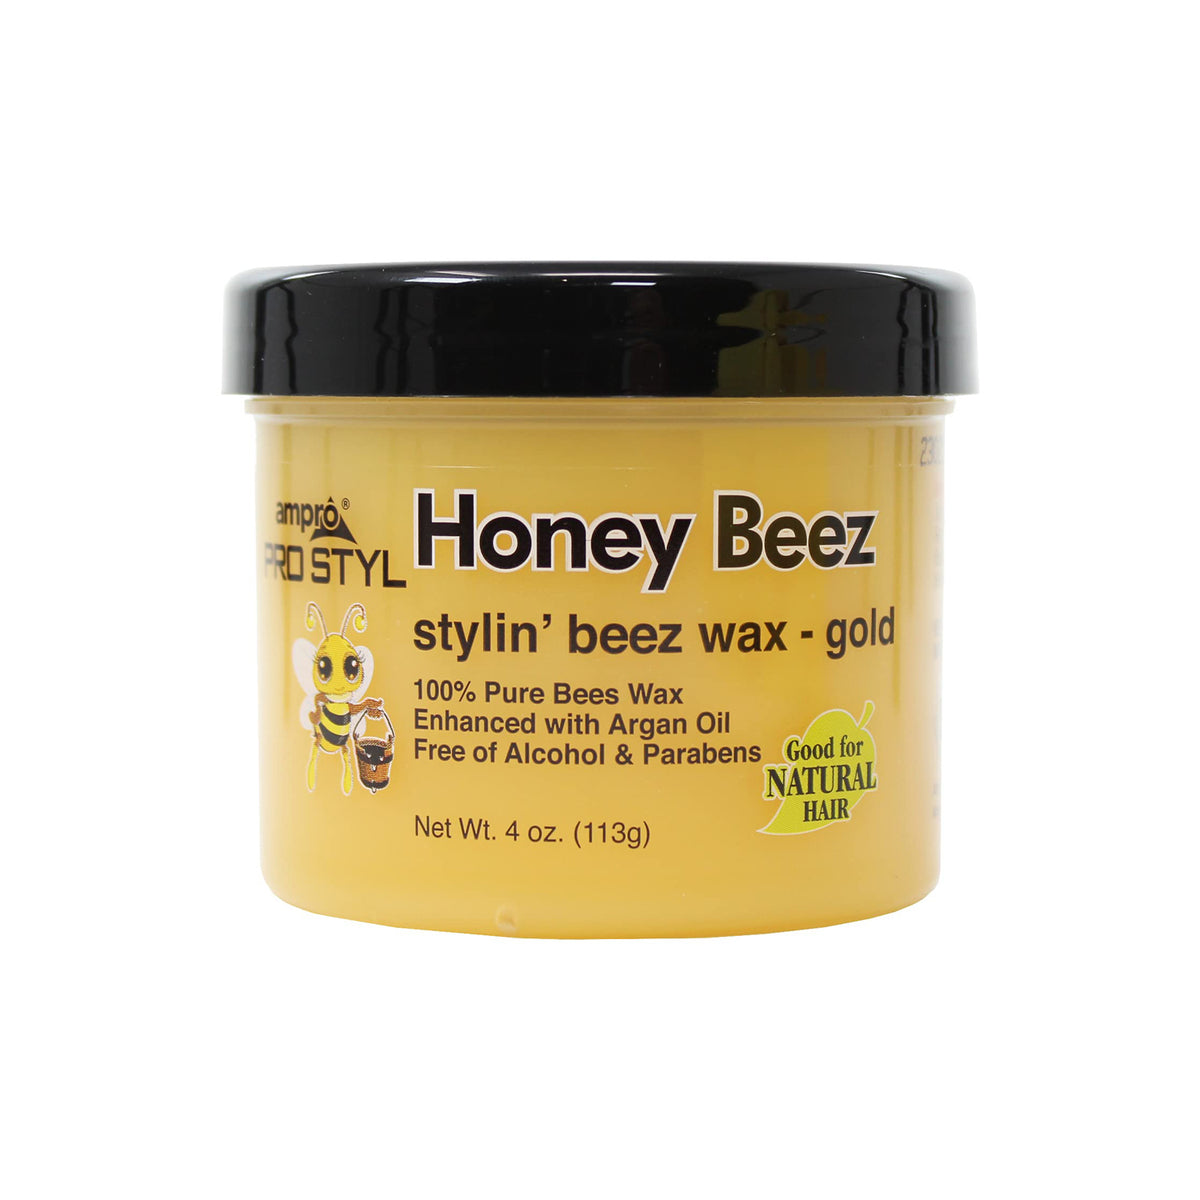 Pro Styl Honey Beez Hair Wax (4 oz) by Ampro – Waba Hair and